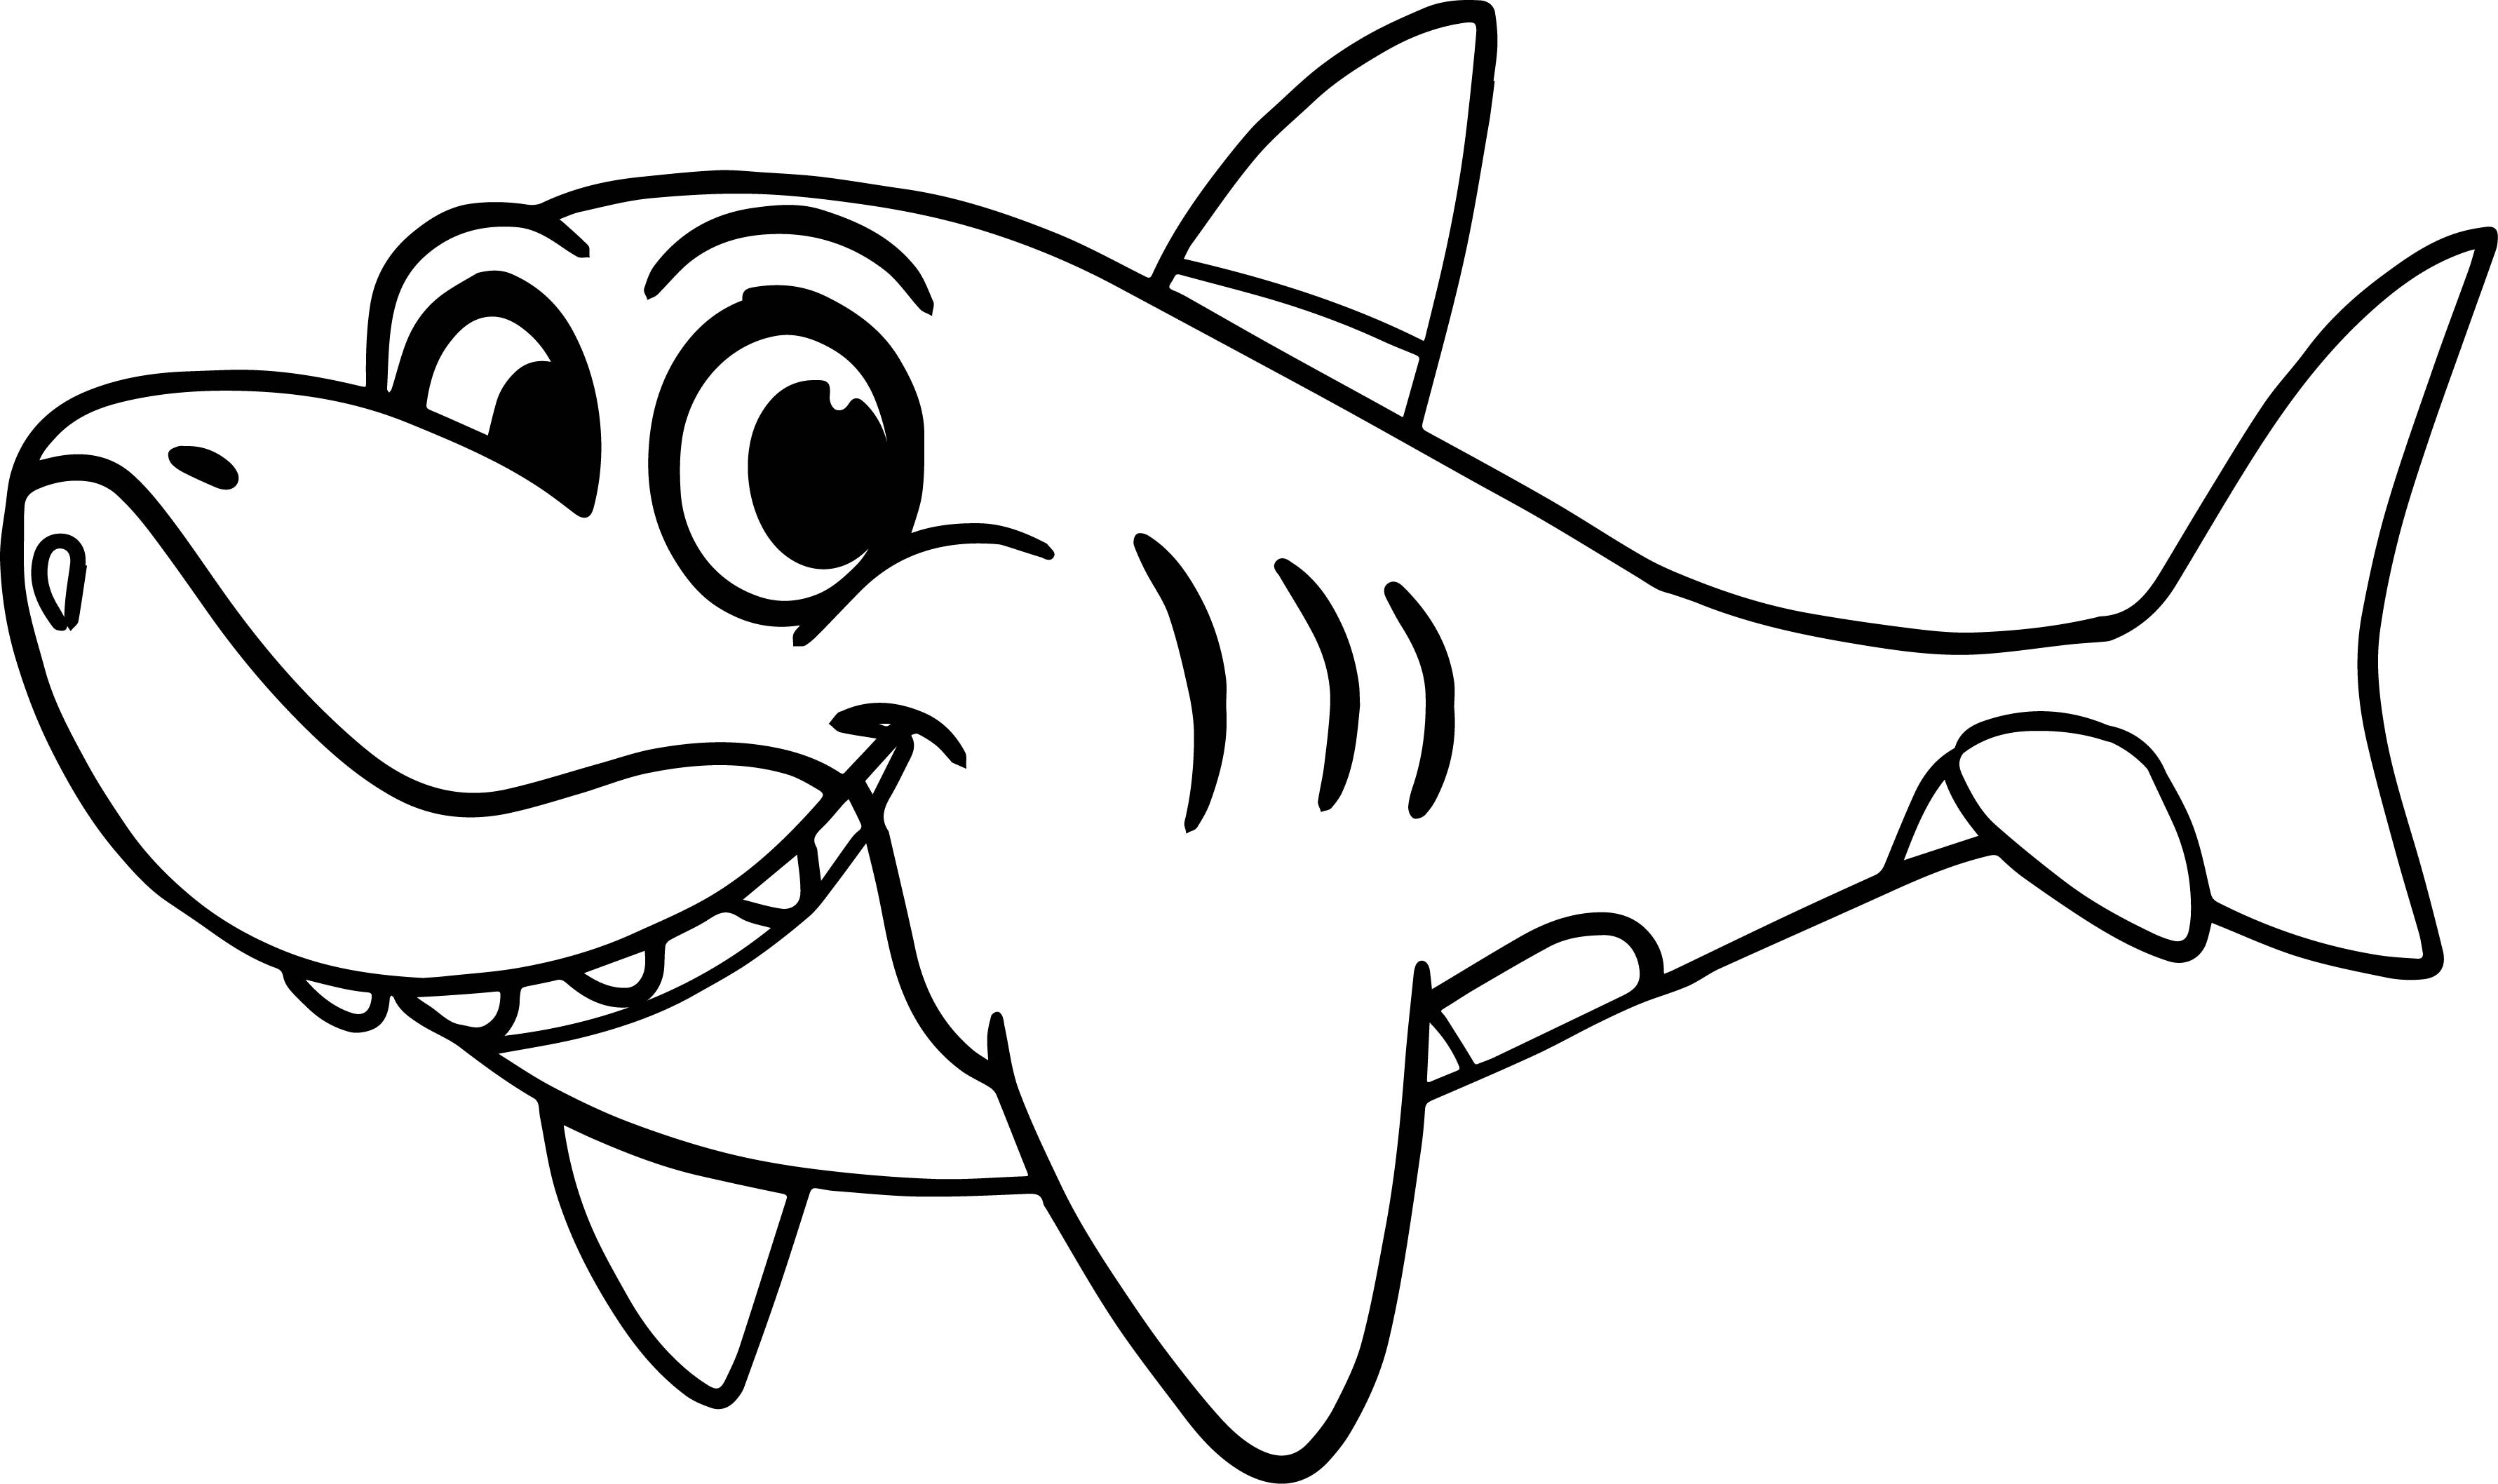 clipart-shark-colour-clipart-shark-colour-transparent-free-for-download-on-webstockreview-2023